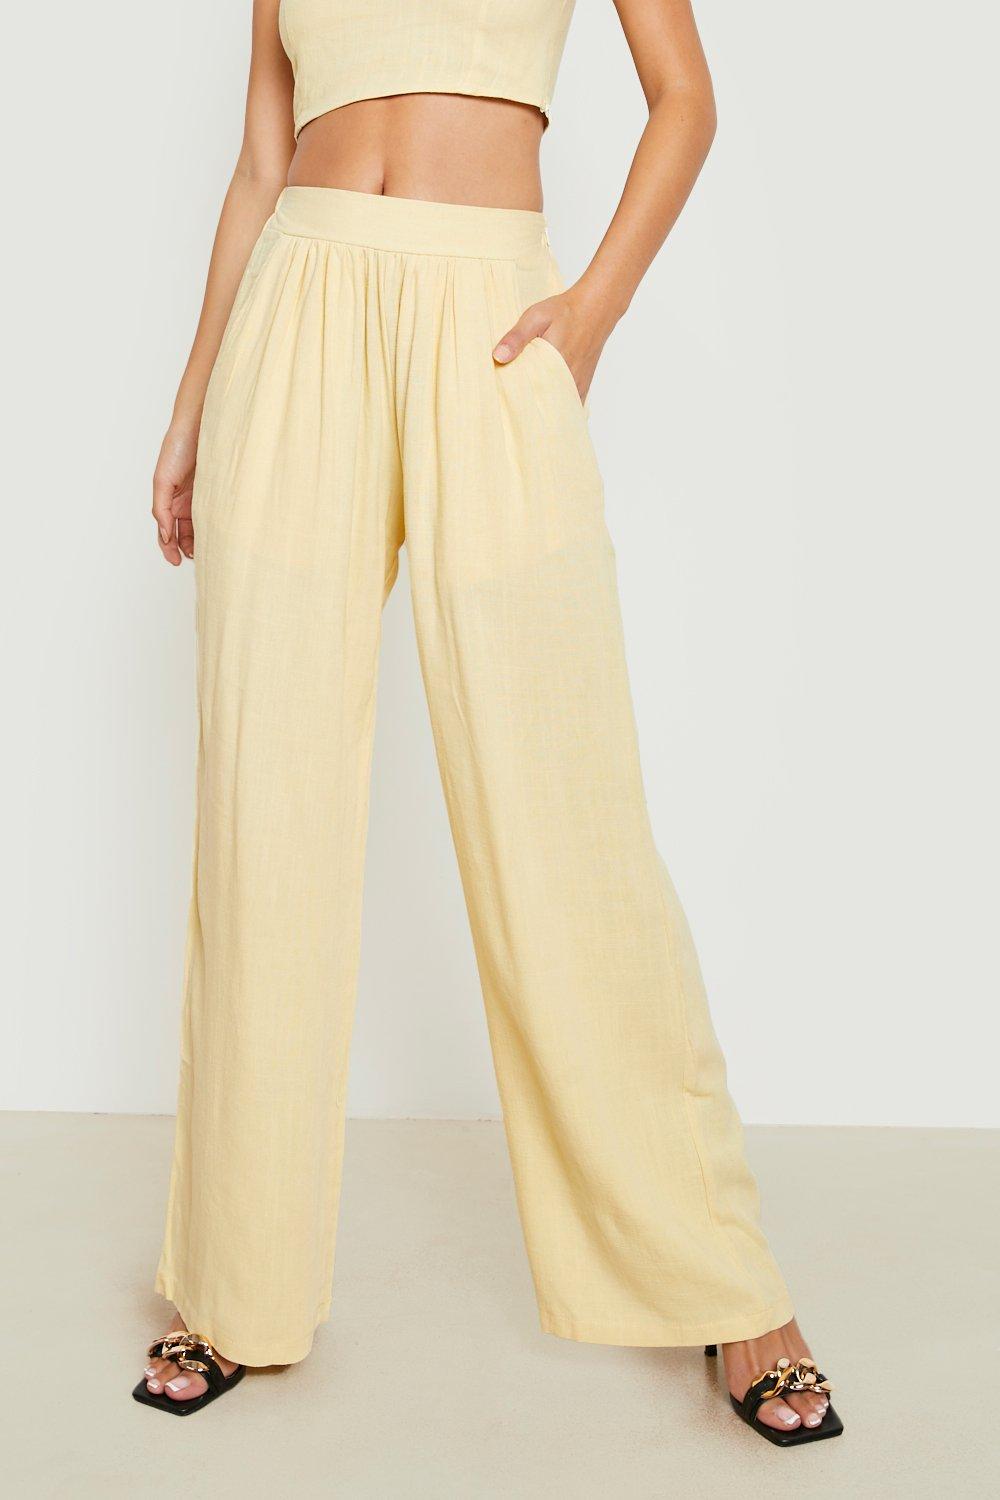 Linen Look Relaxed Fit Wide Leg Pants